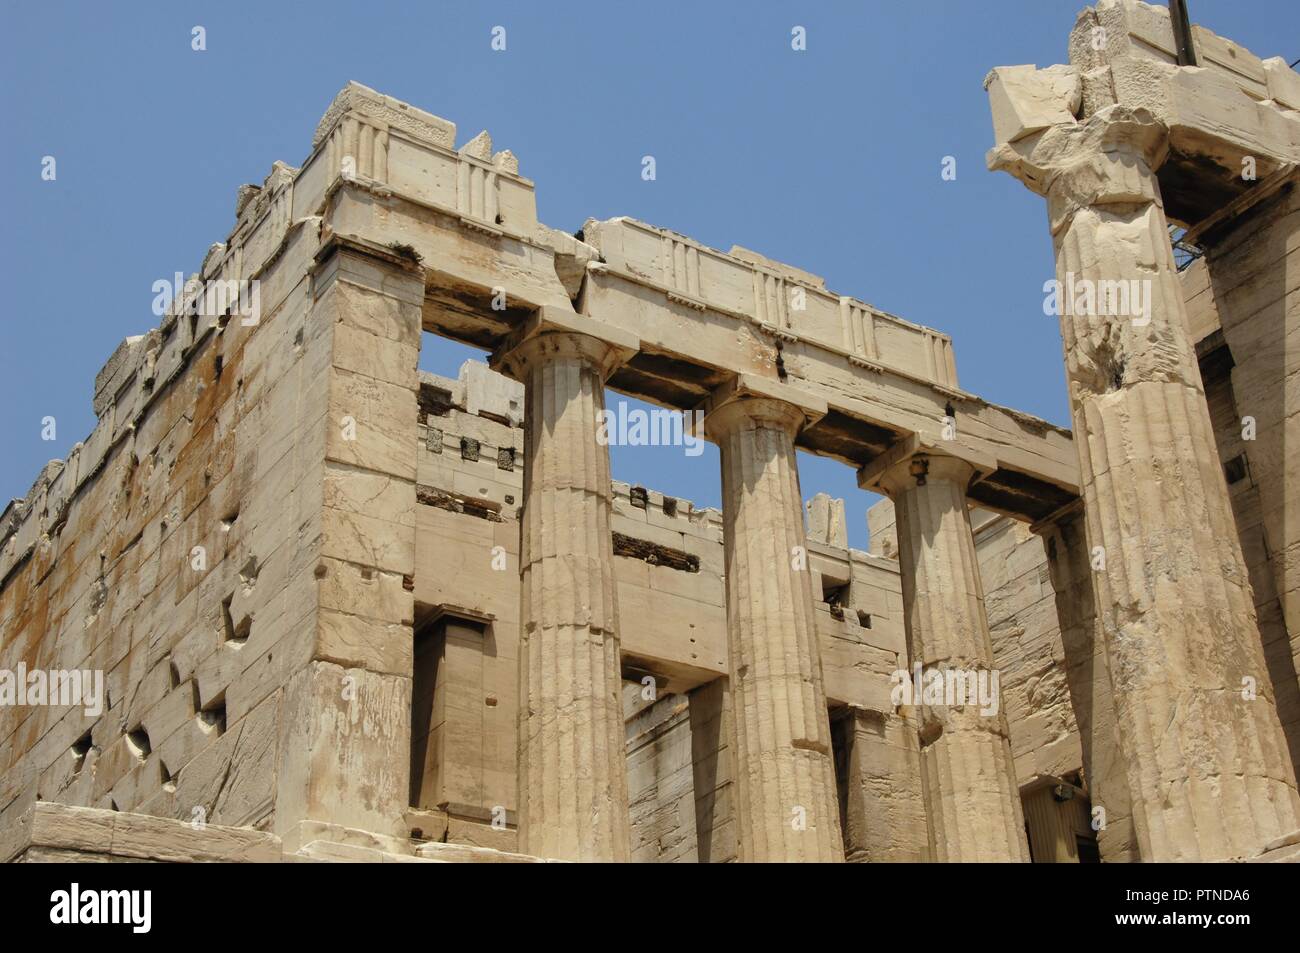 Greece. Athens. Propylaea. Monumental gateway to the Acropolis. It was designed by the architect Mnesicles, 437 BC-432BC. (The Age of Pericles). Doric style columns. Architectural detail. Stock Photo